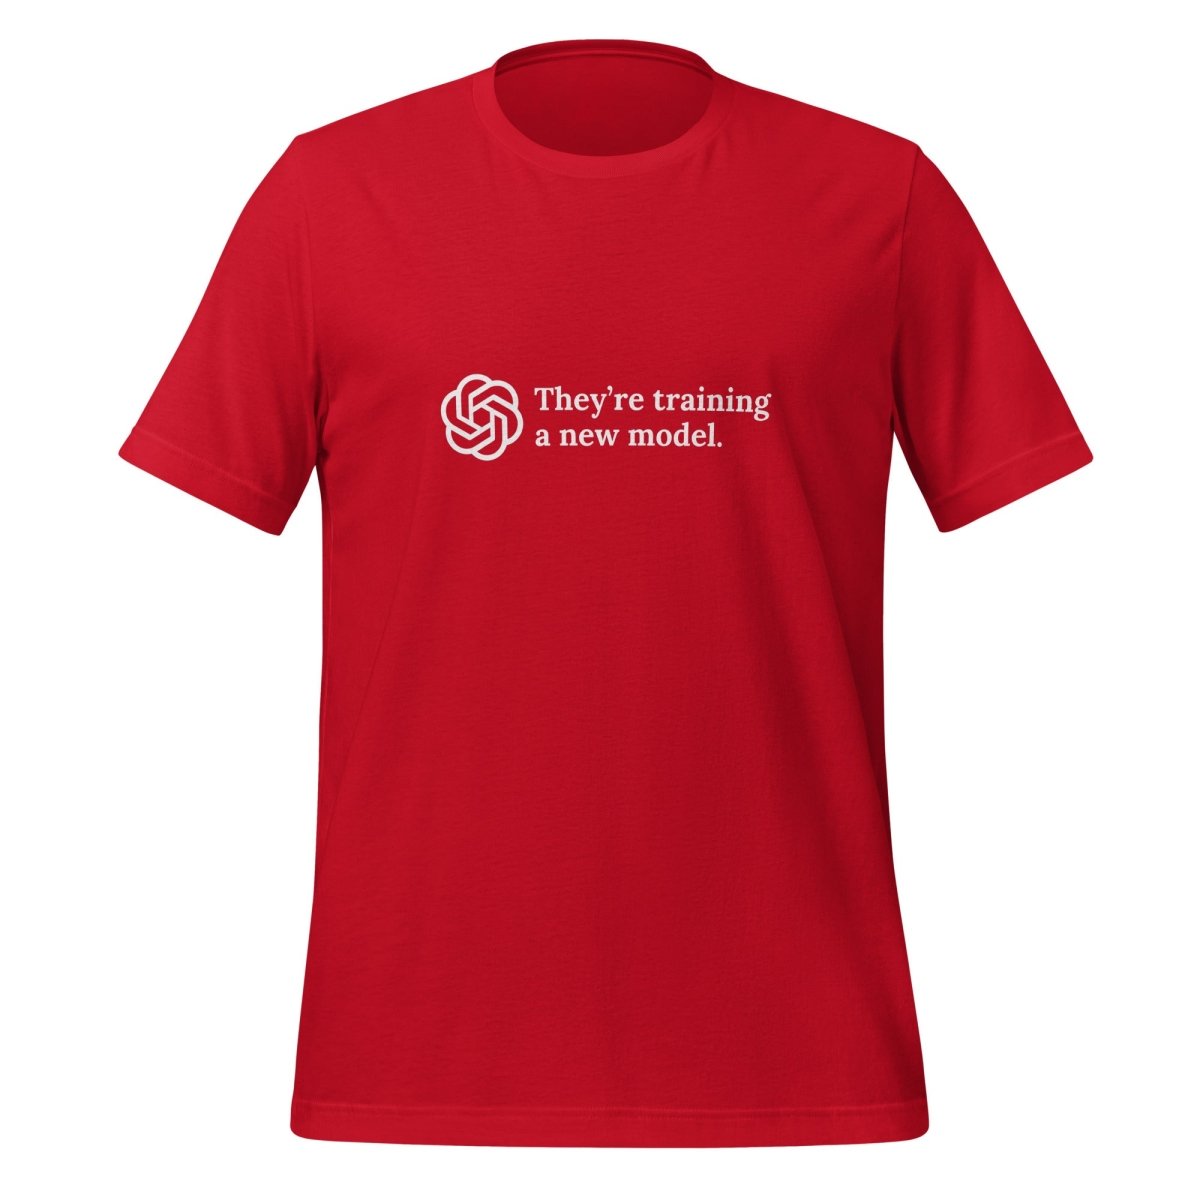 They're training a new model. T - Shirt (unisex) - Red - AI Store